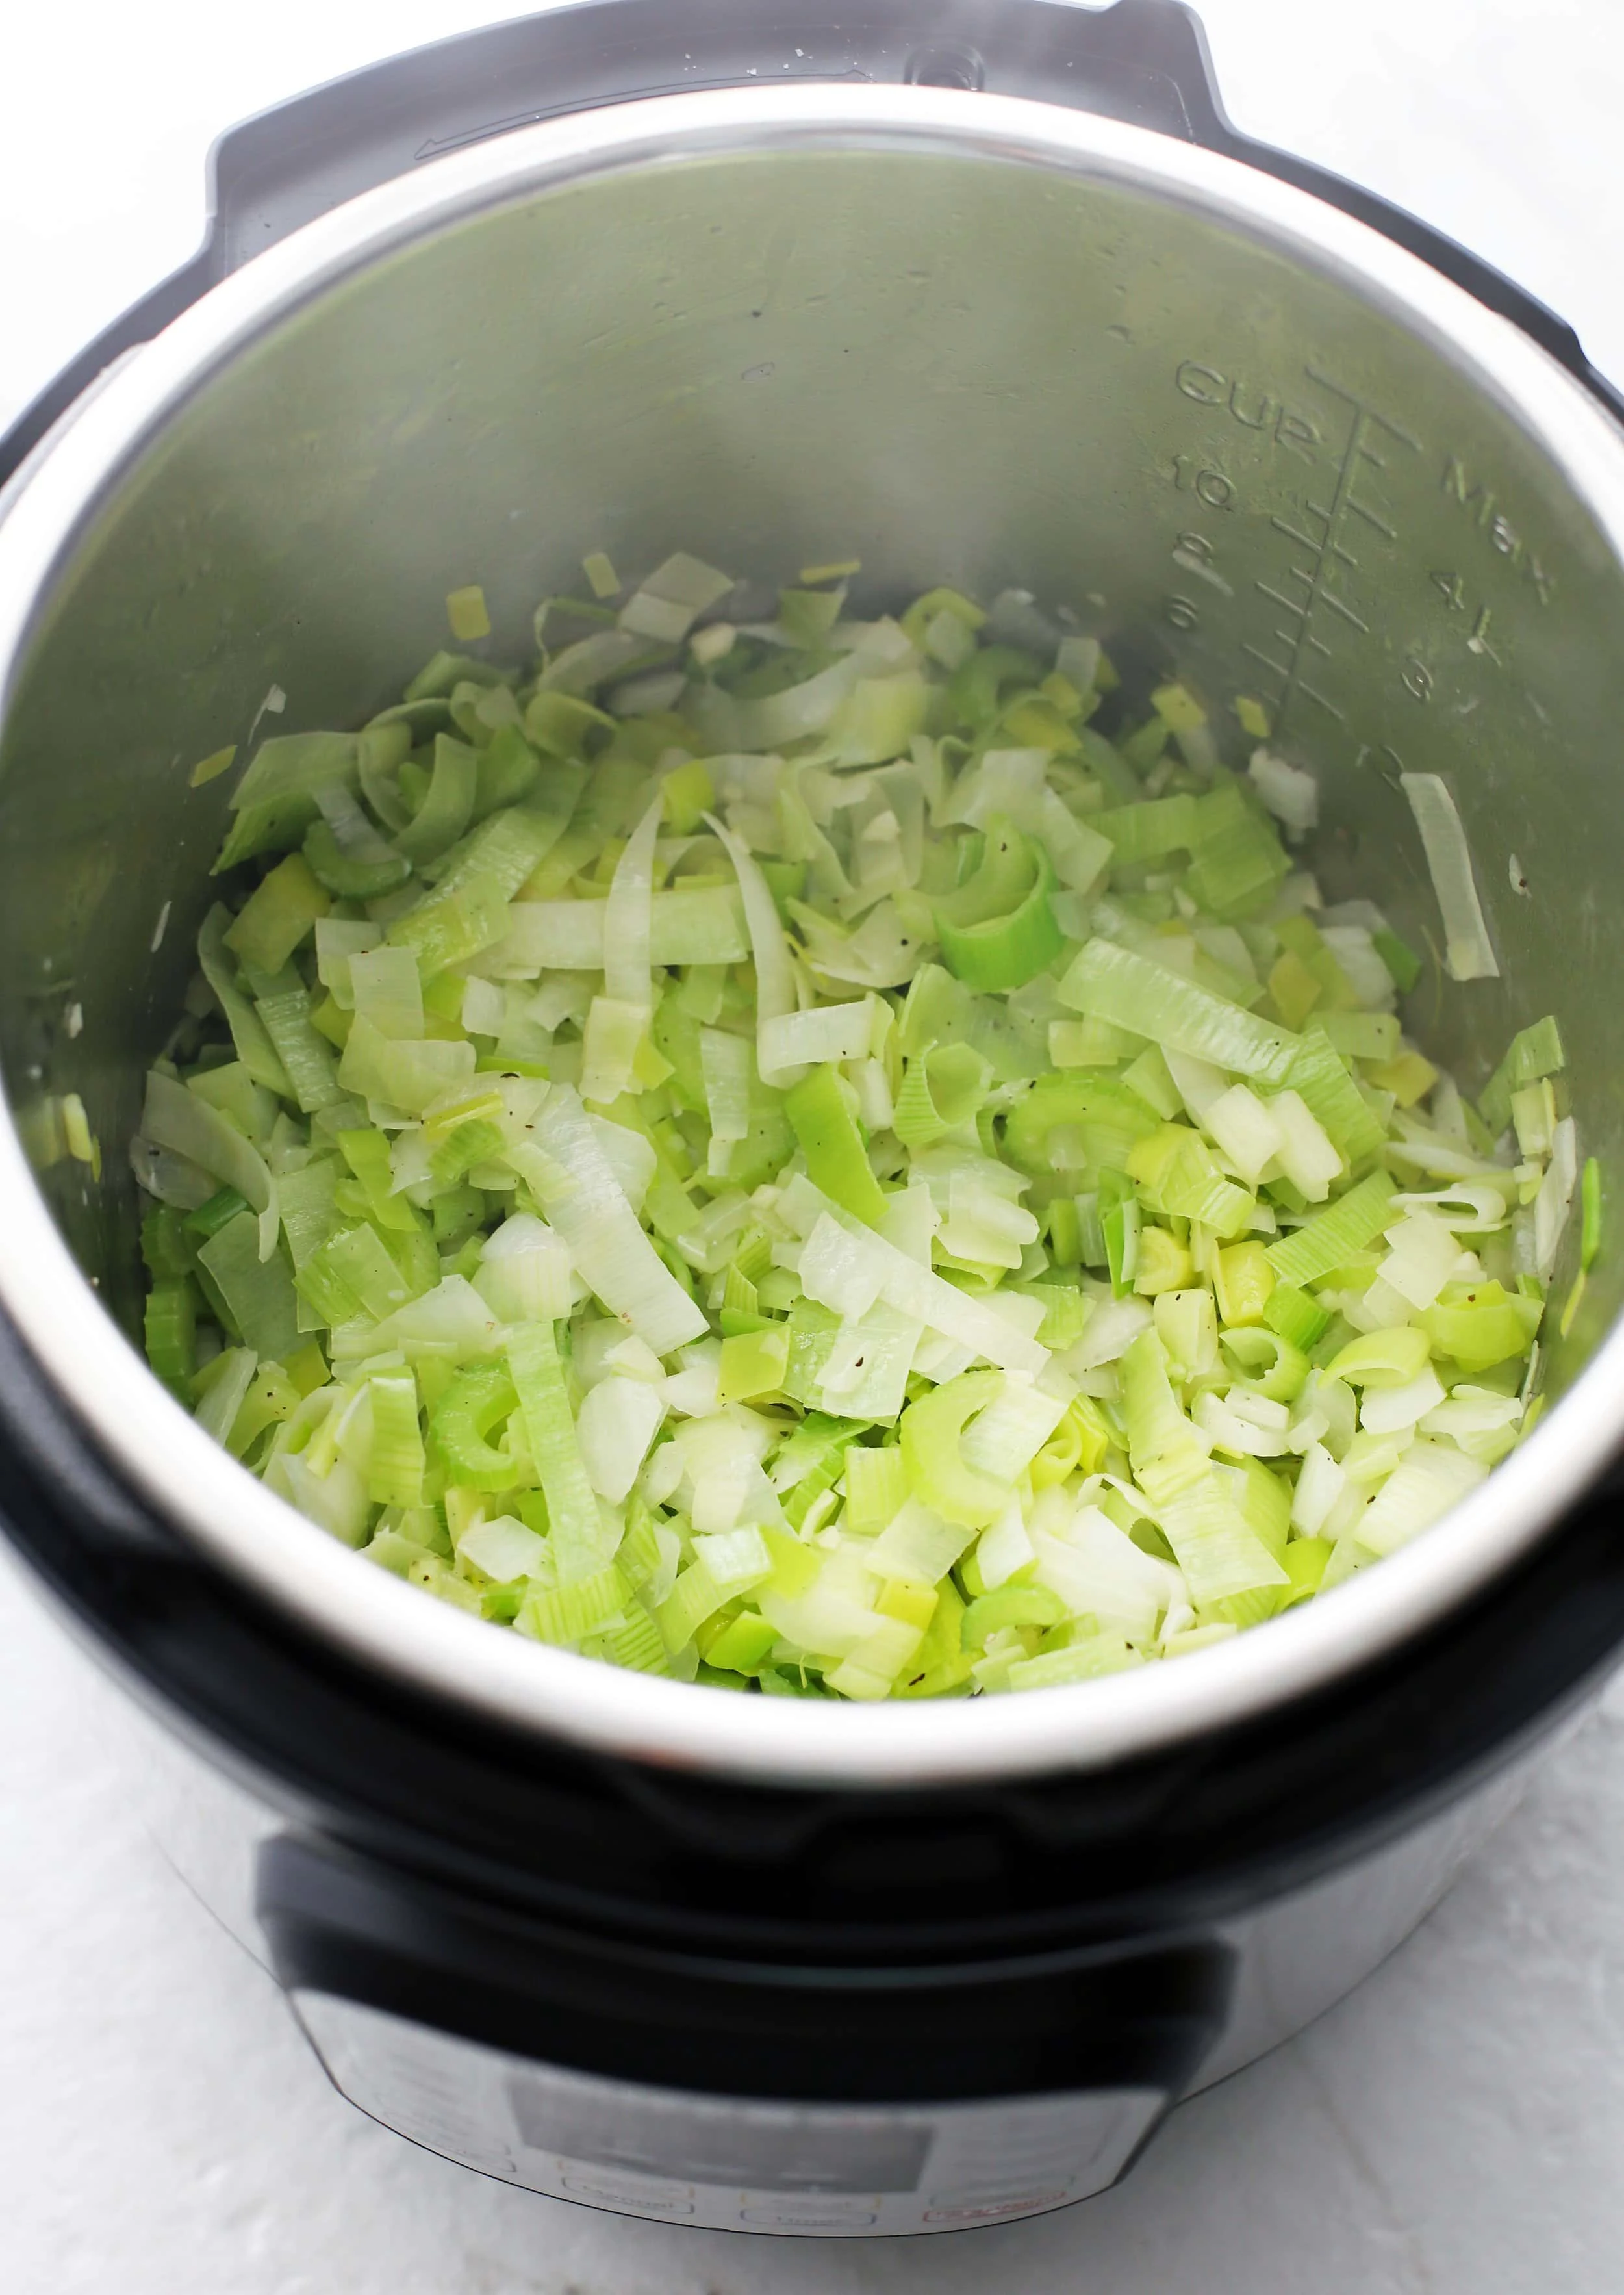 Sautéed chopped leeks, onions, celery, and garlic in the Instant Pot.